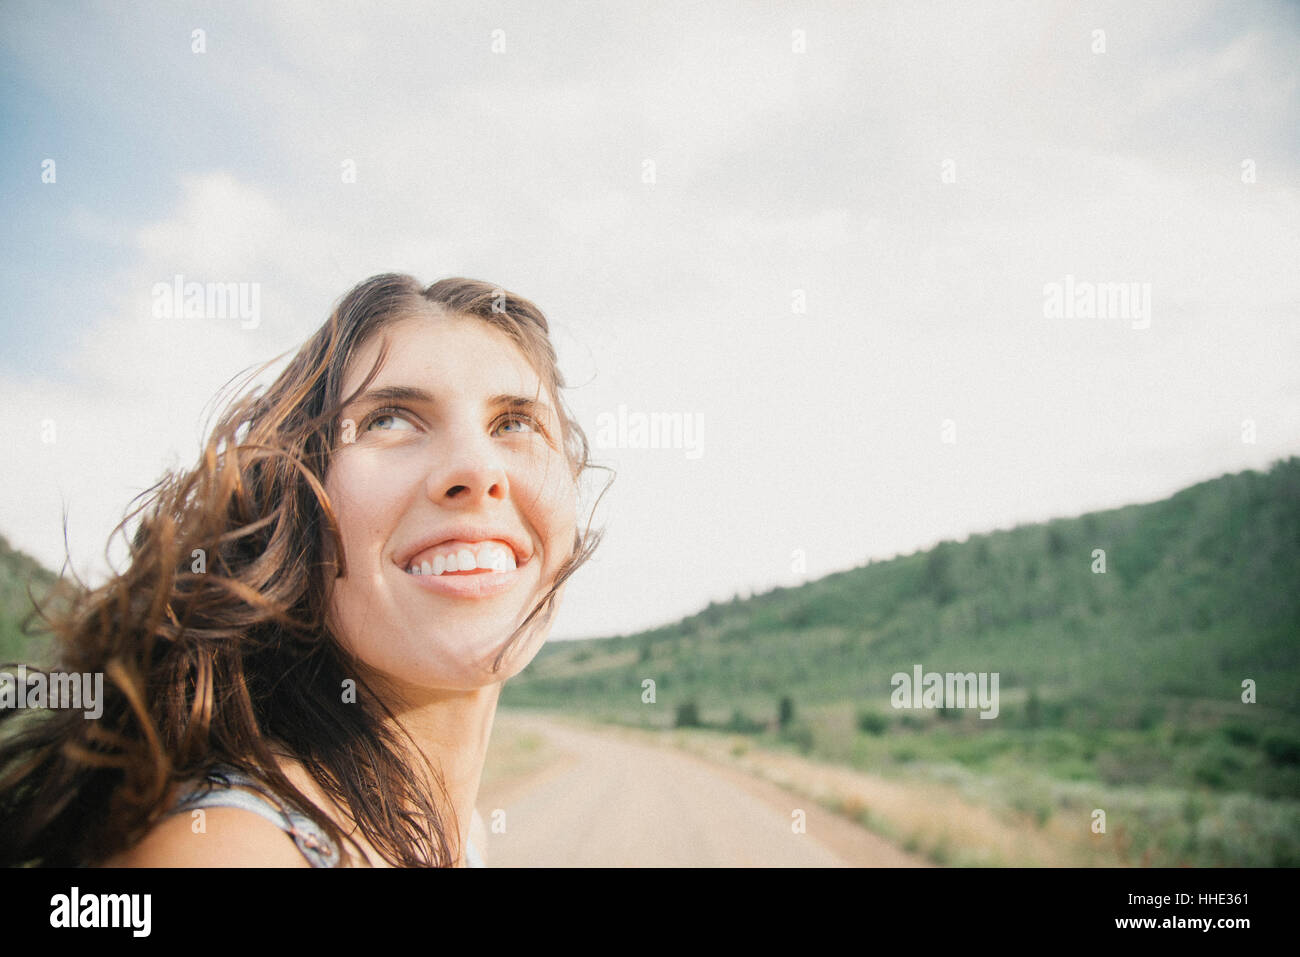 A young woman with windblown hair on a mountain road. Stock Photo